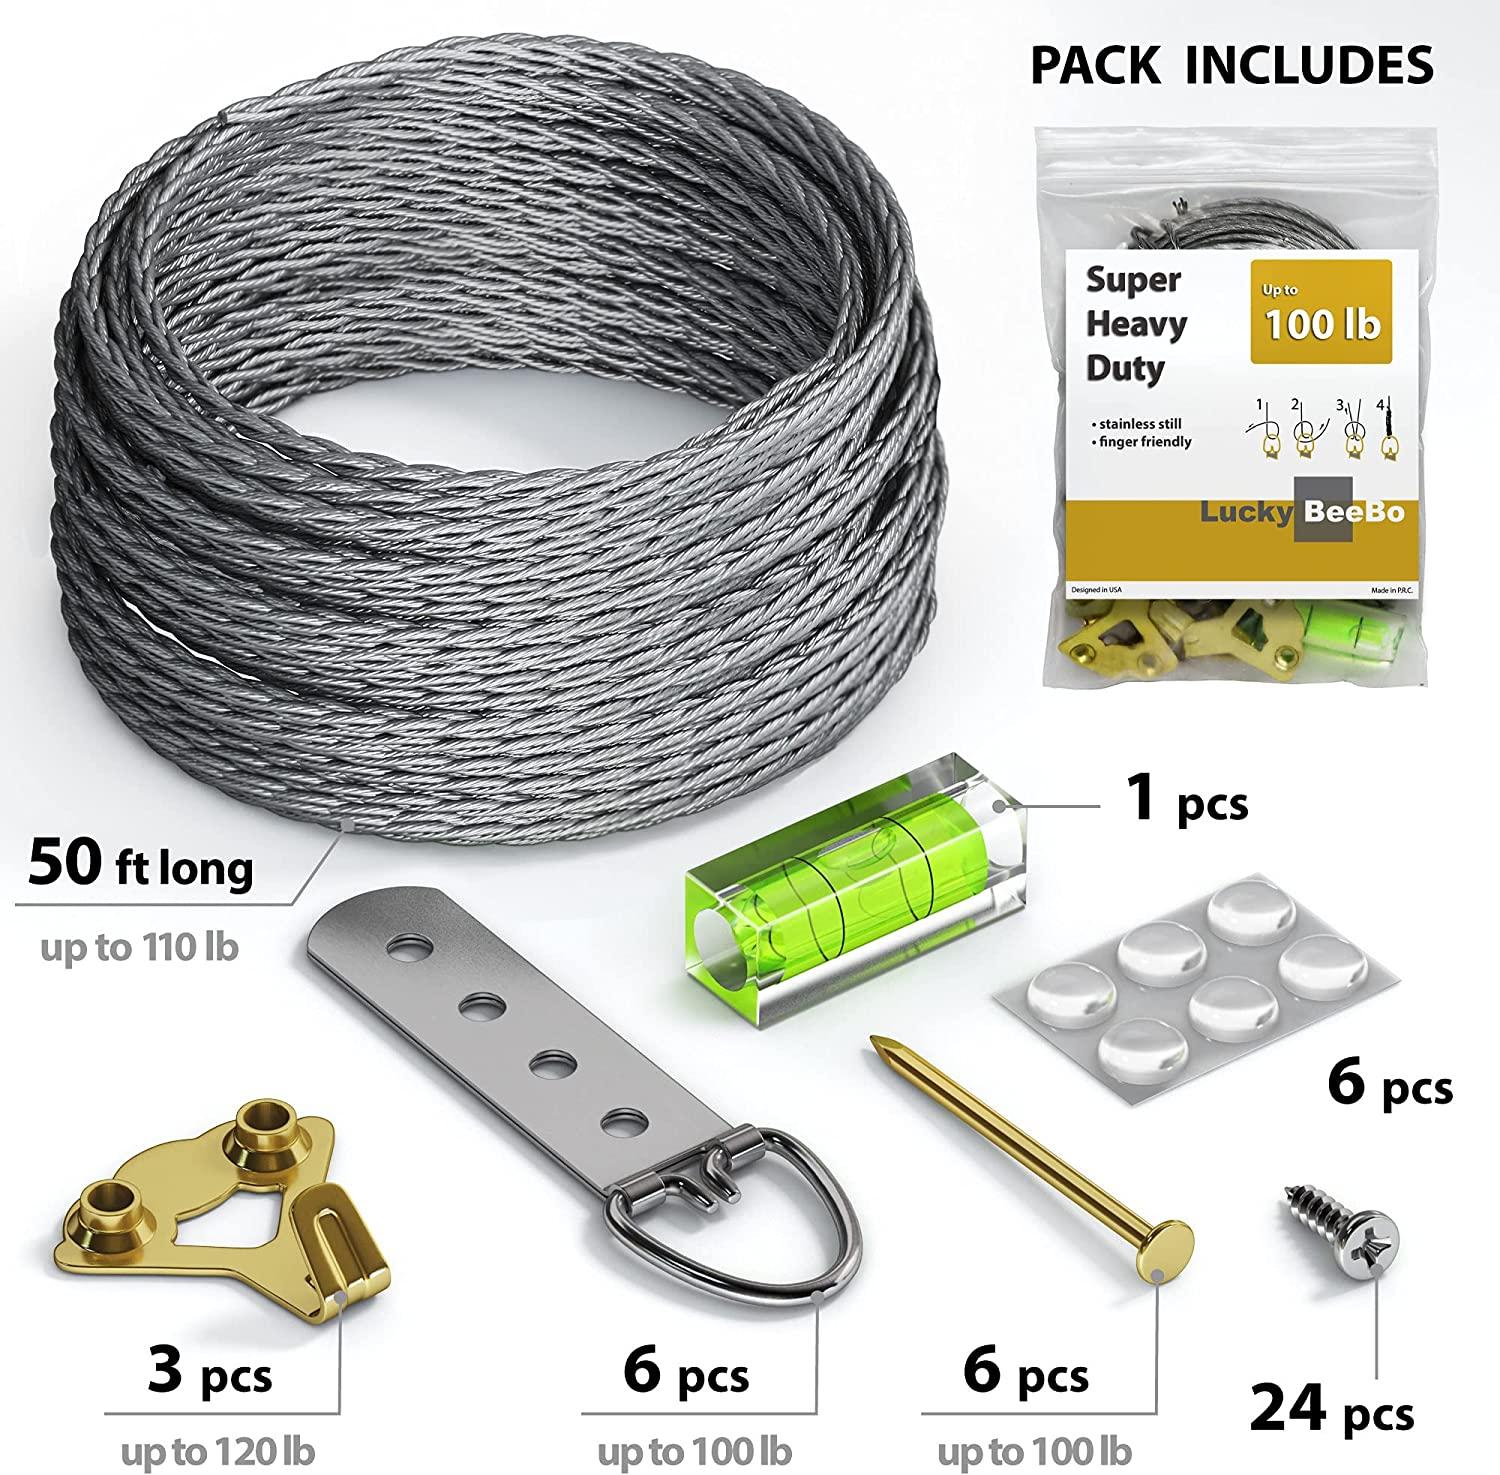 Picture Hanging Wire Kit, 4pcs 1m Double Ring Hanging Wire, Load 66 lbs - Silver